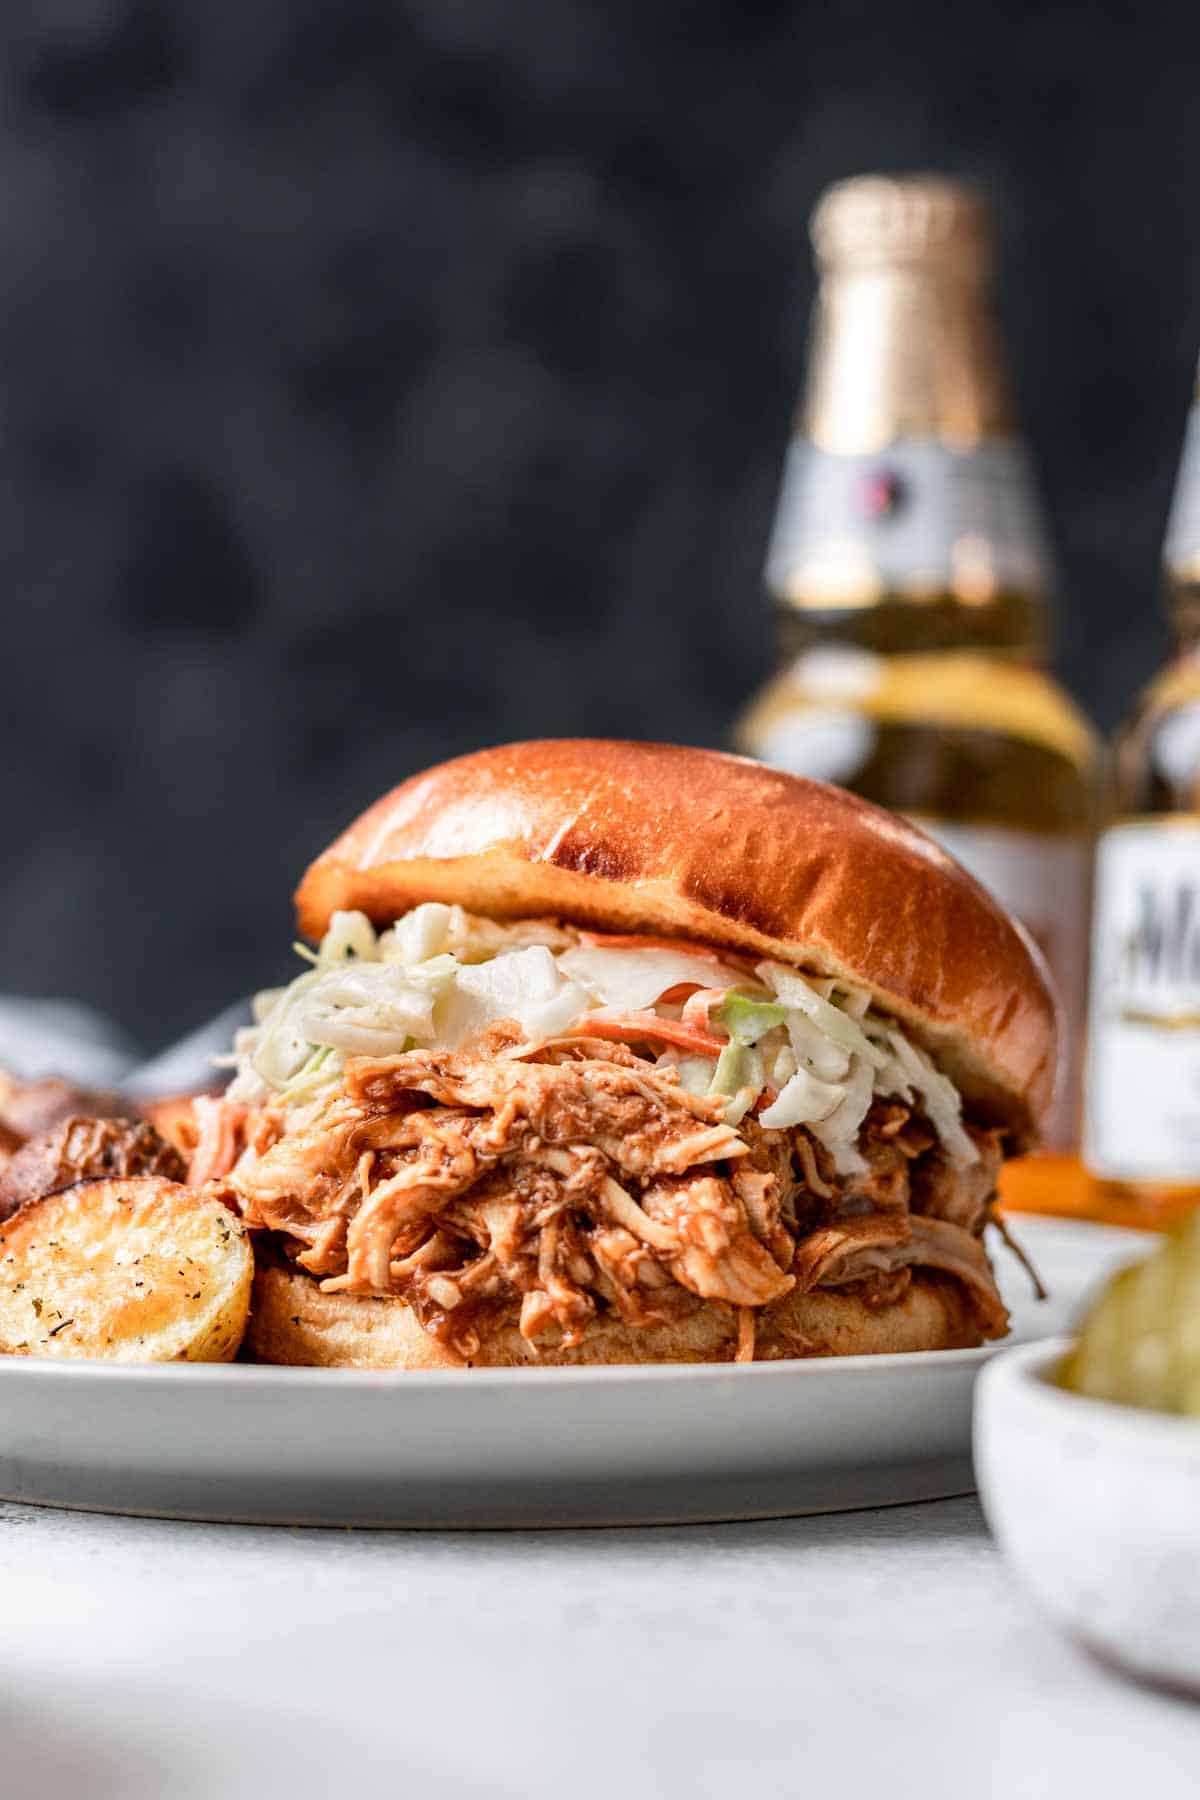 Instant pot bbq shredded chicken on a bun with coleslaw.